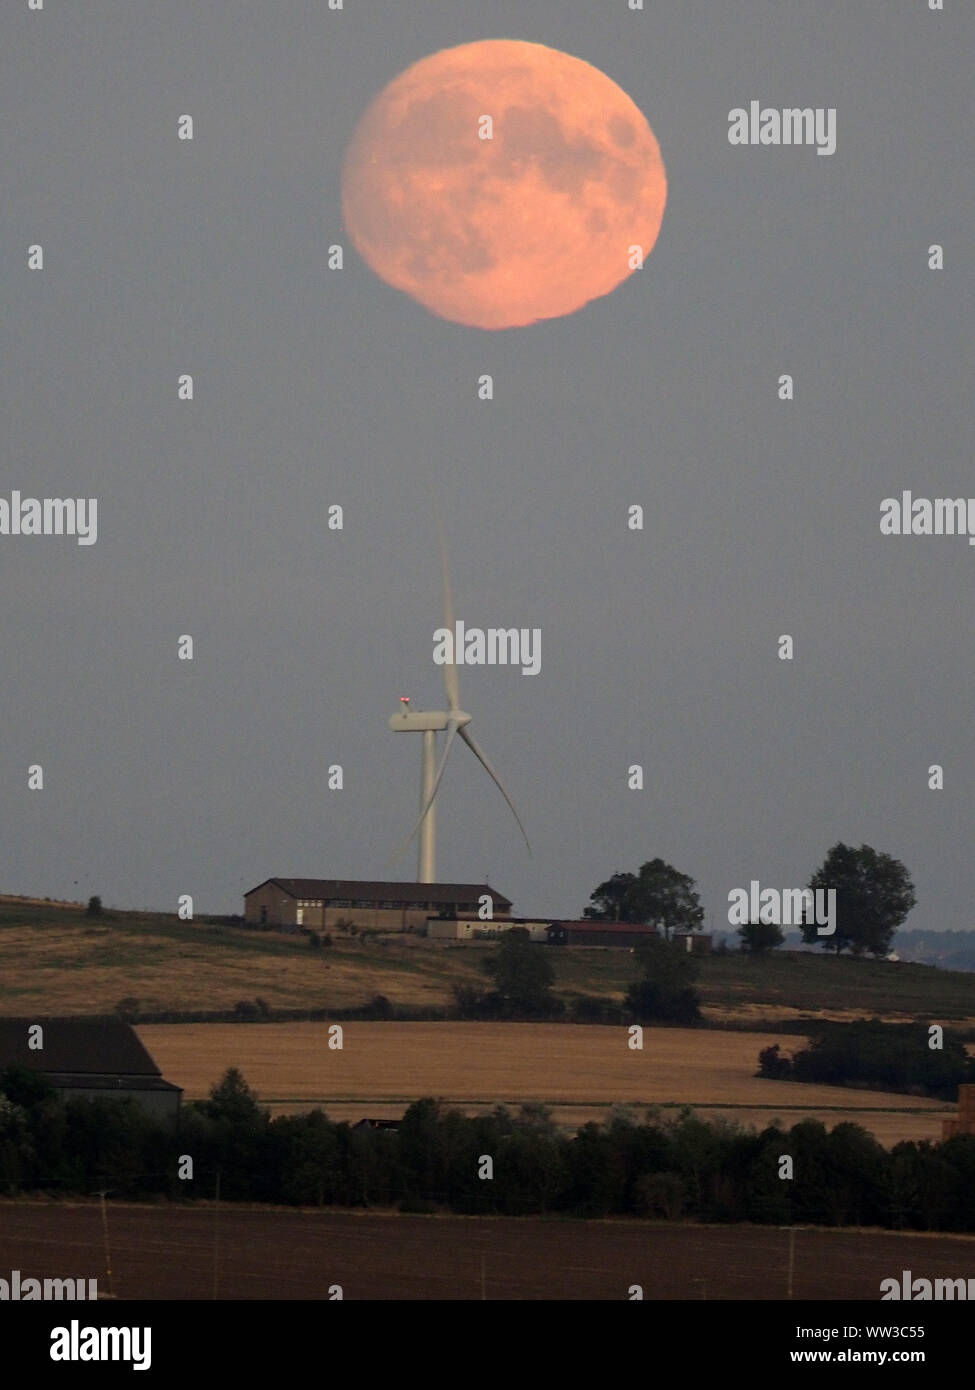 Halfway Houses, Sheerness, Kent, UK. 12th September, 2019. UK Weather: the 98% waxing gibbous moon rising over farmland on the Isle of Sheppey in Kent as seen from Halway Houses, Sheerness. Tomorrow will see a full moon - the first on Friday 13th for a number of years. The September full moon is known as the Harvest Moon. Credit: James Bell/Alamy Live News Stock Photo